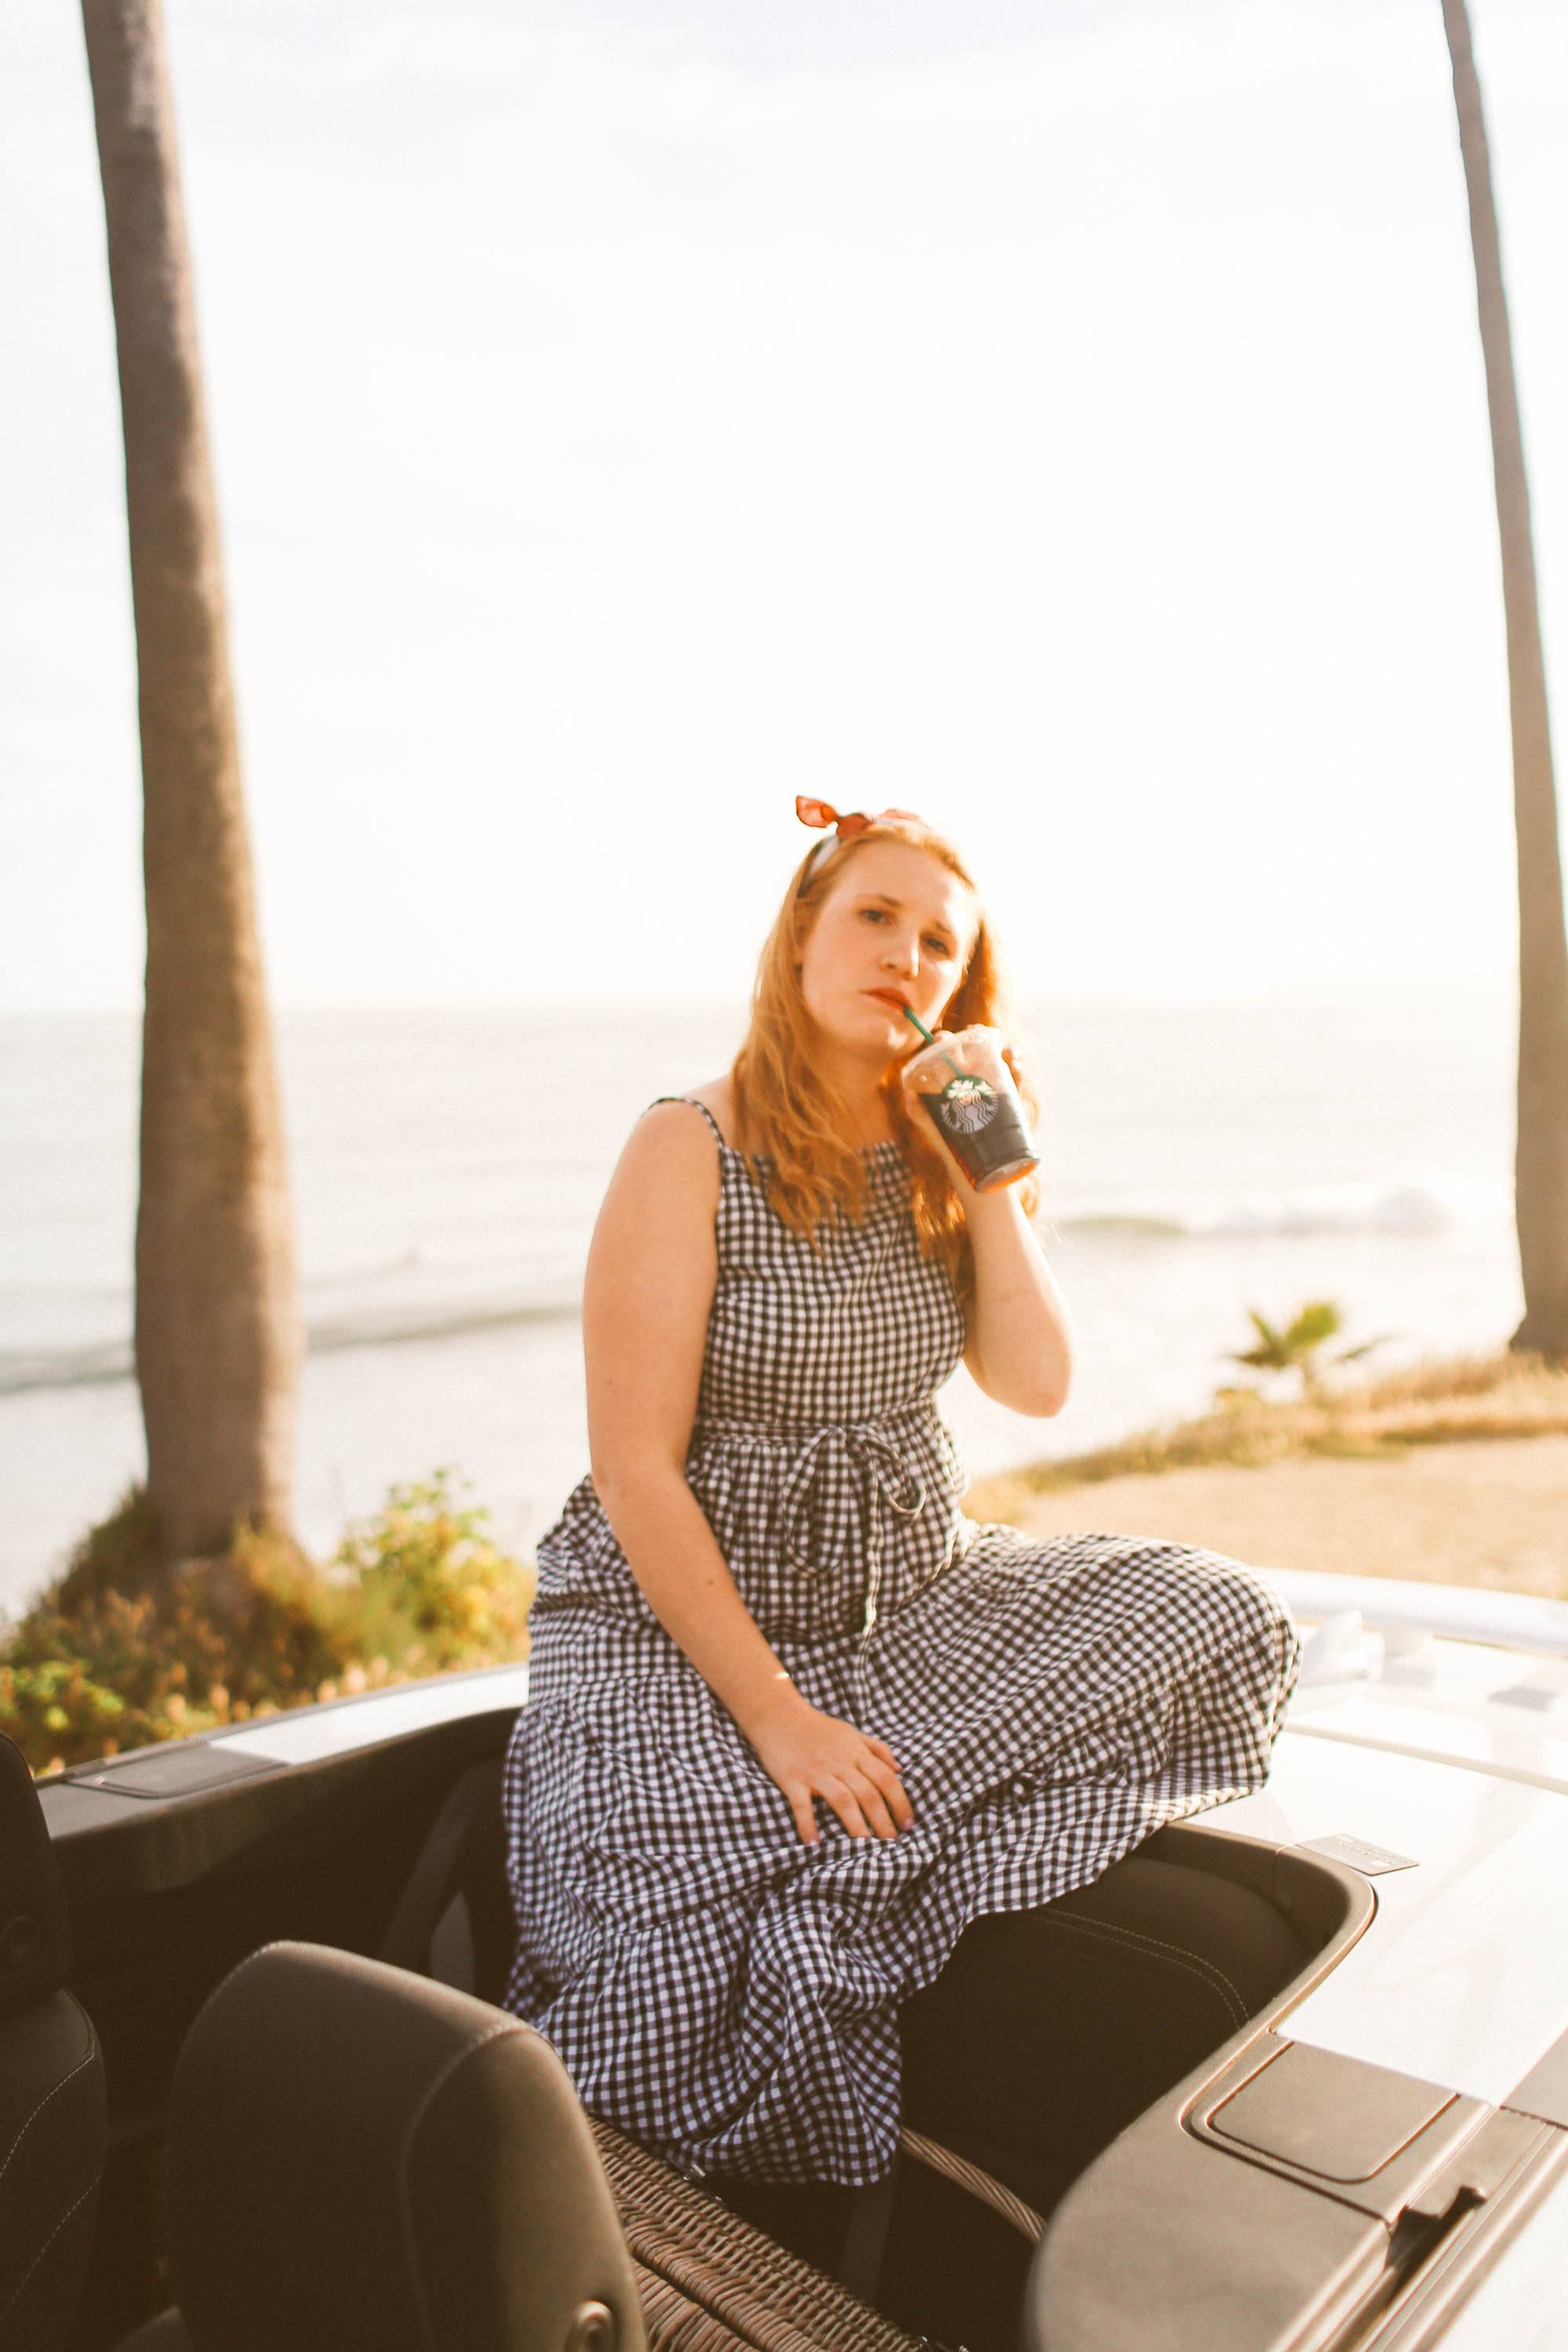 Woman in black and white gingham dress sitting on convertible drinking starbucks